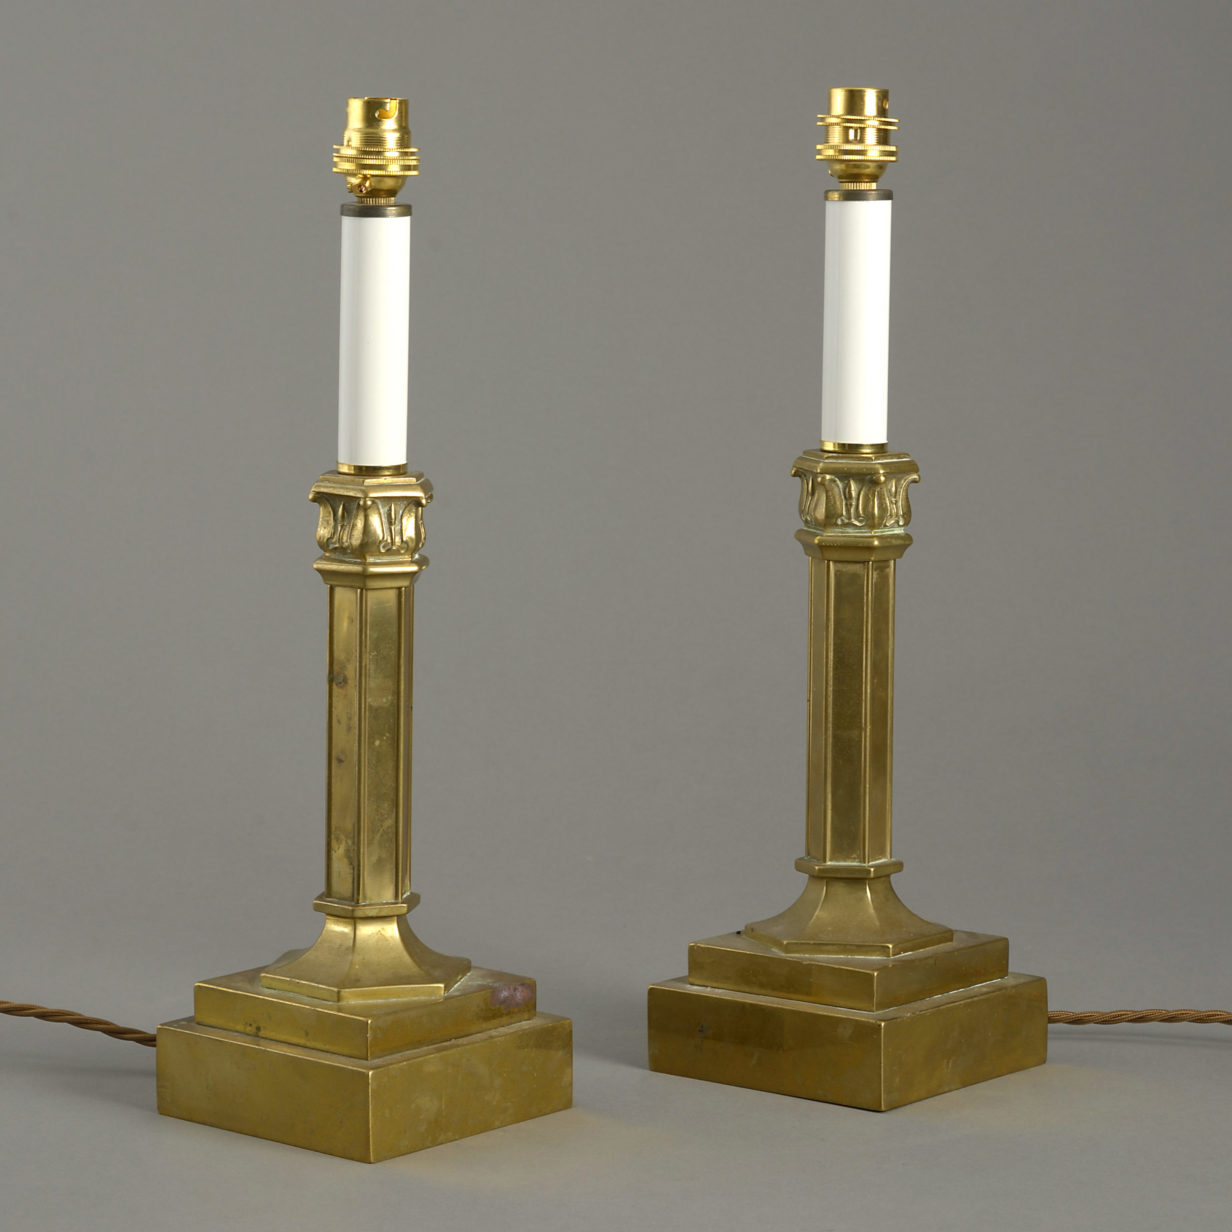 A mid-19th century pair of gilt brass table lamps